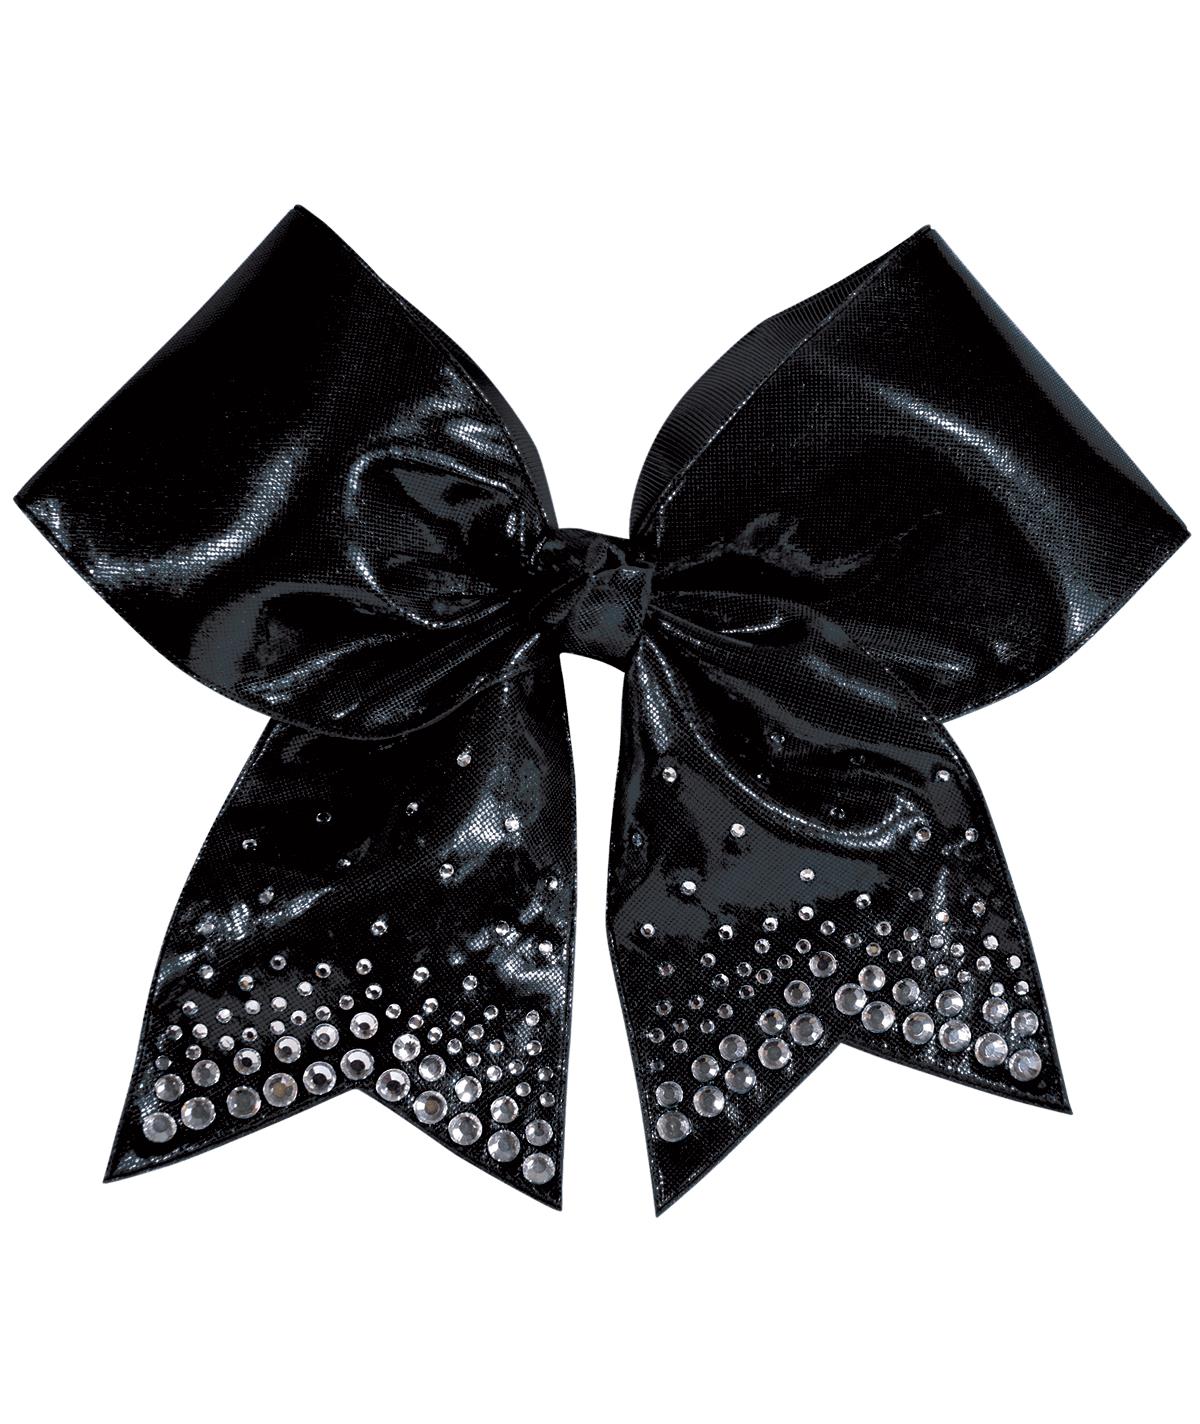 2 tone Columbia Blue and Silver Glitter Cheer Bow